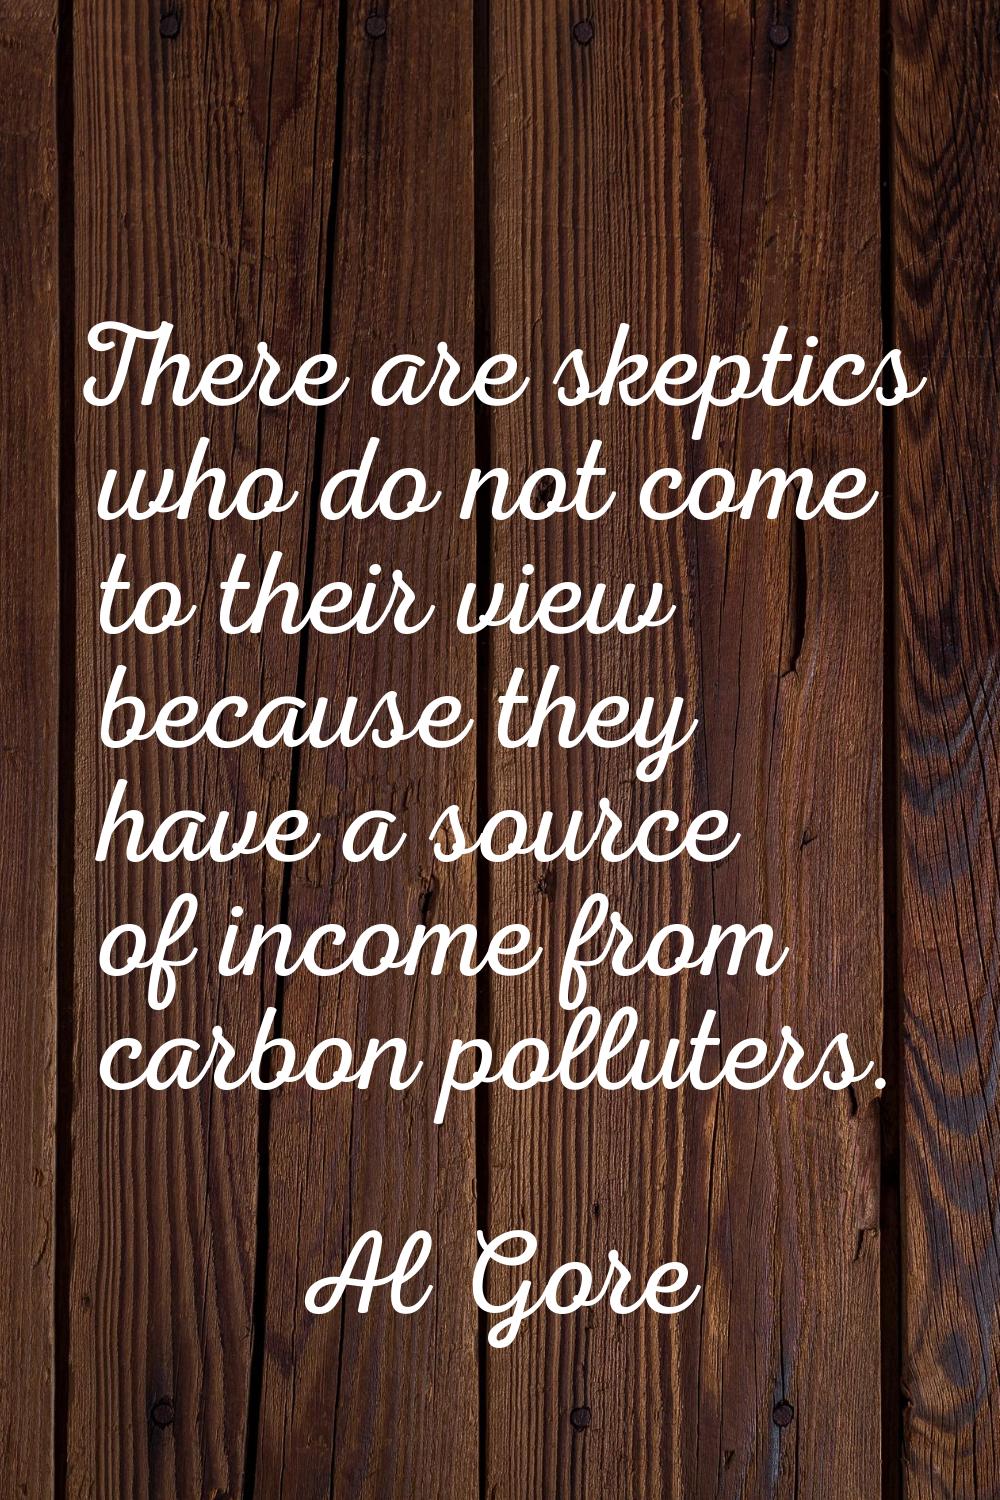 There are skeptics who do not come to their view because they have a source of income from carbon p